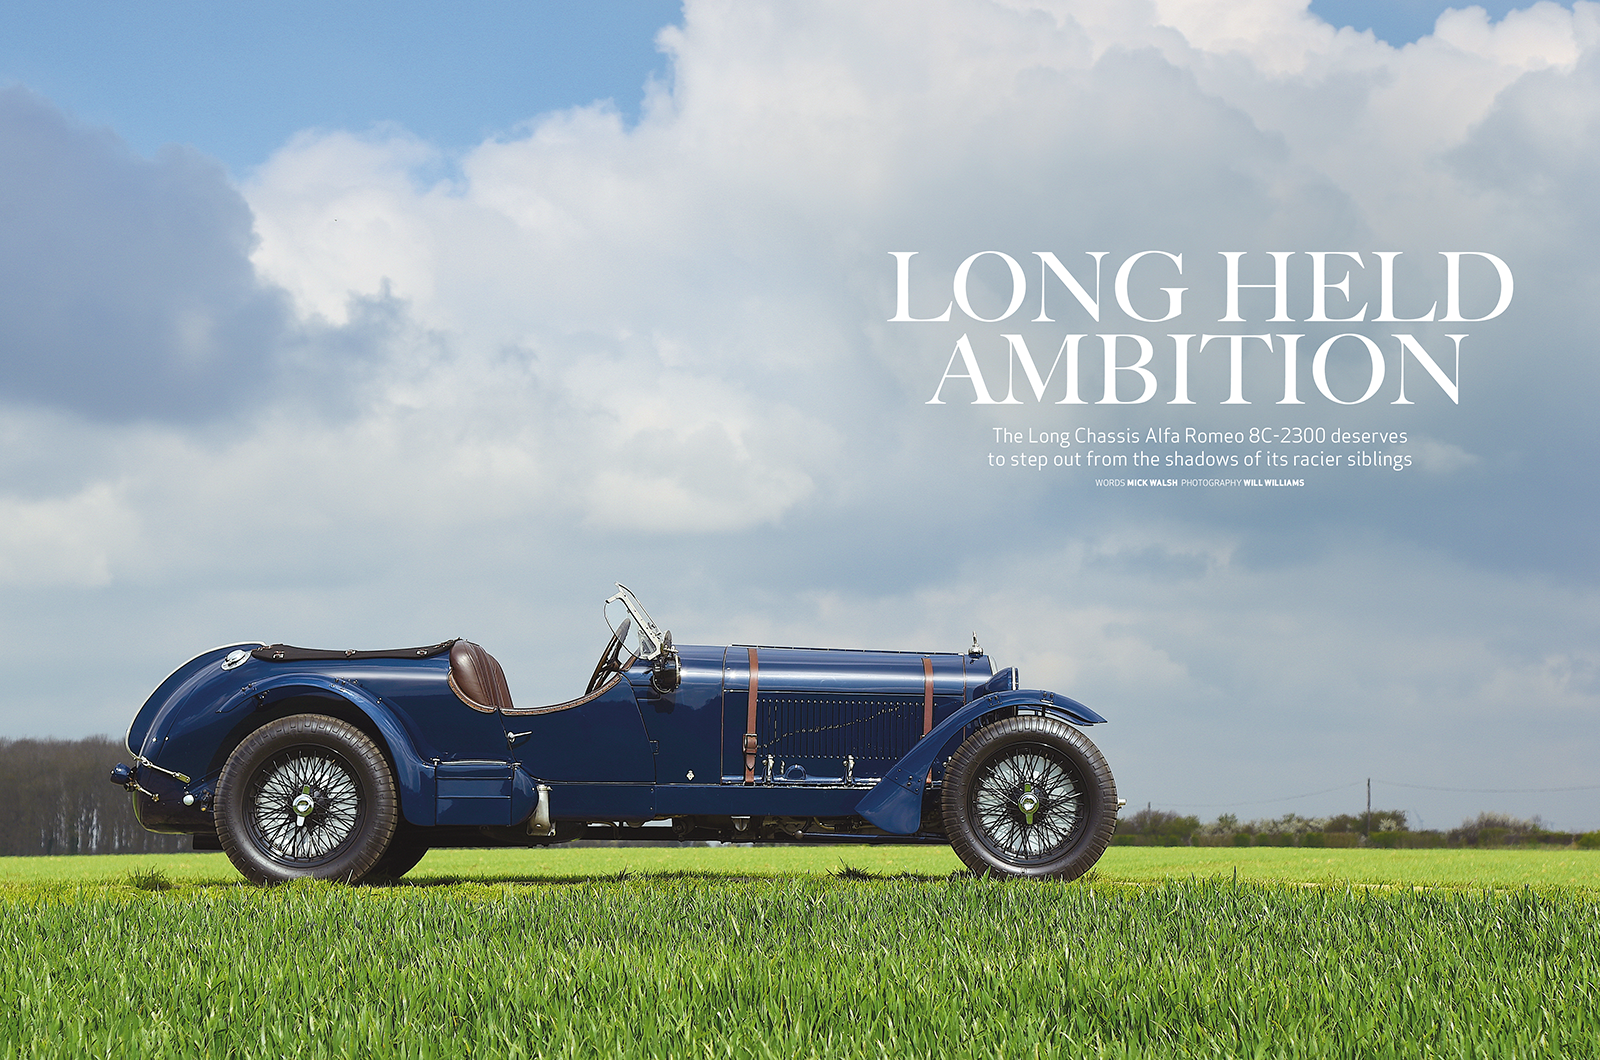 Classic & Sports Car – V8 sports car legends: Inside the June 2019 issue of C&SC